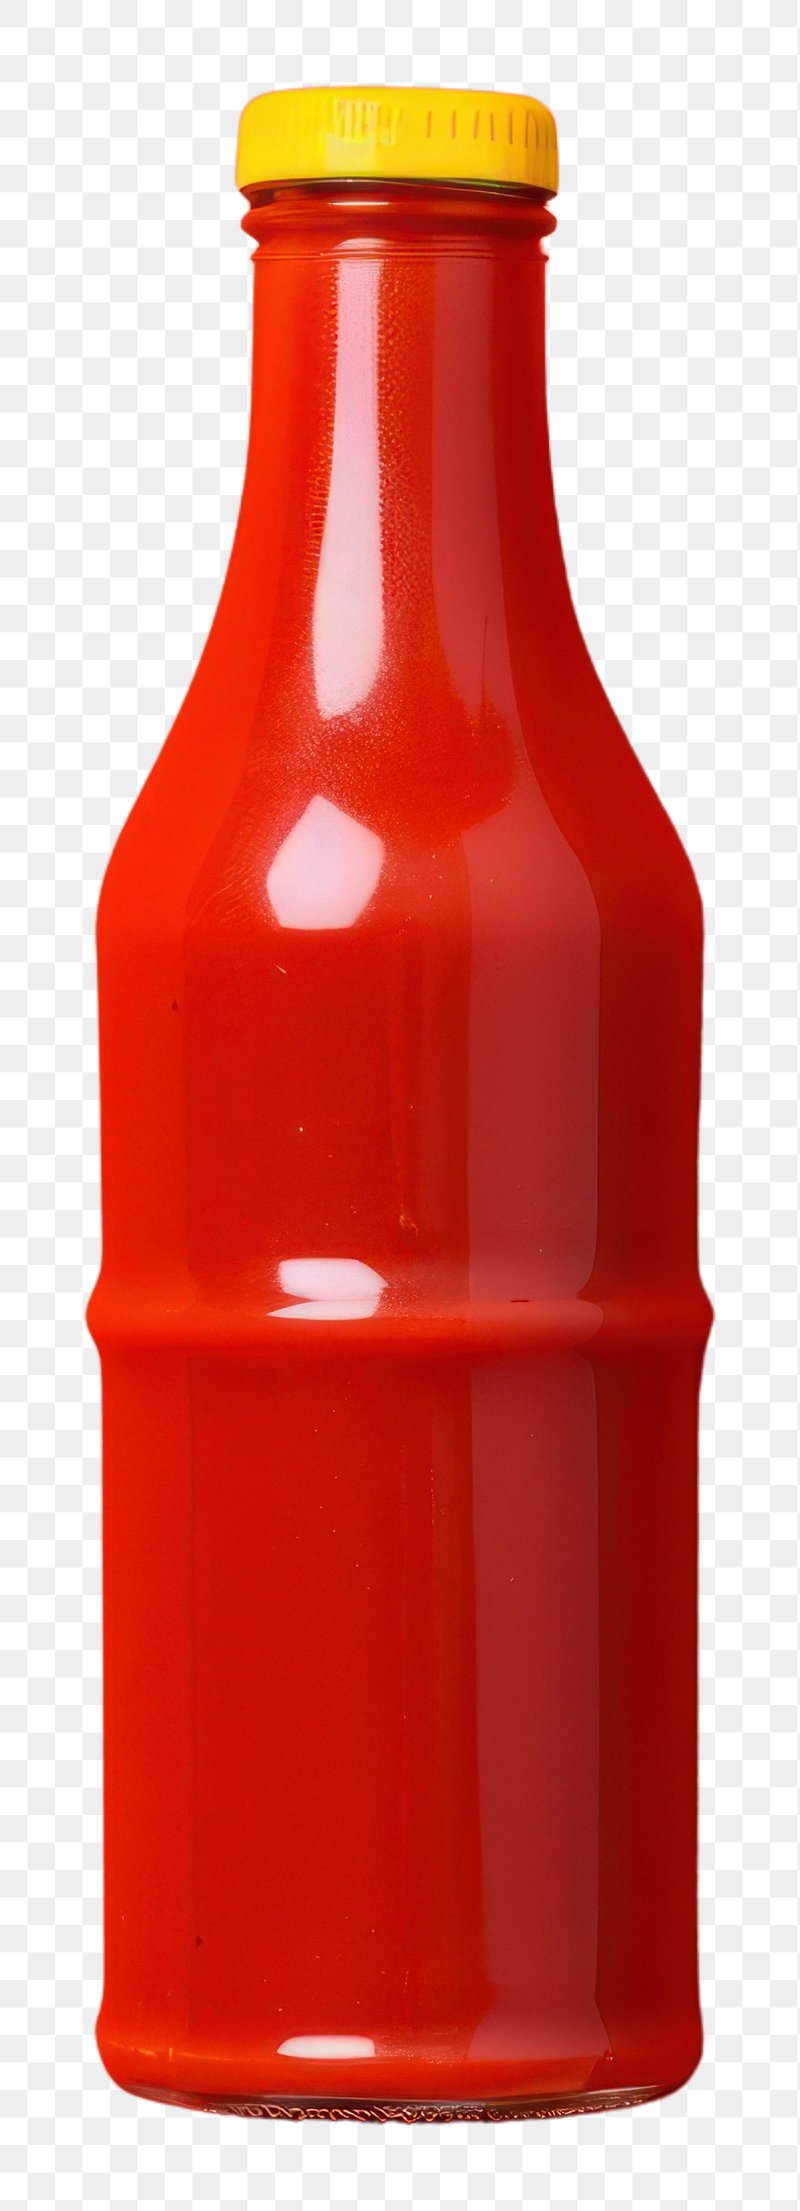 Bottle Of Ketchup, Food, Sauce, Bottle PNG Transparent Image and Clipart  for Free Download